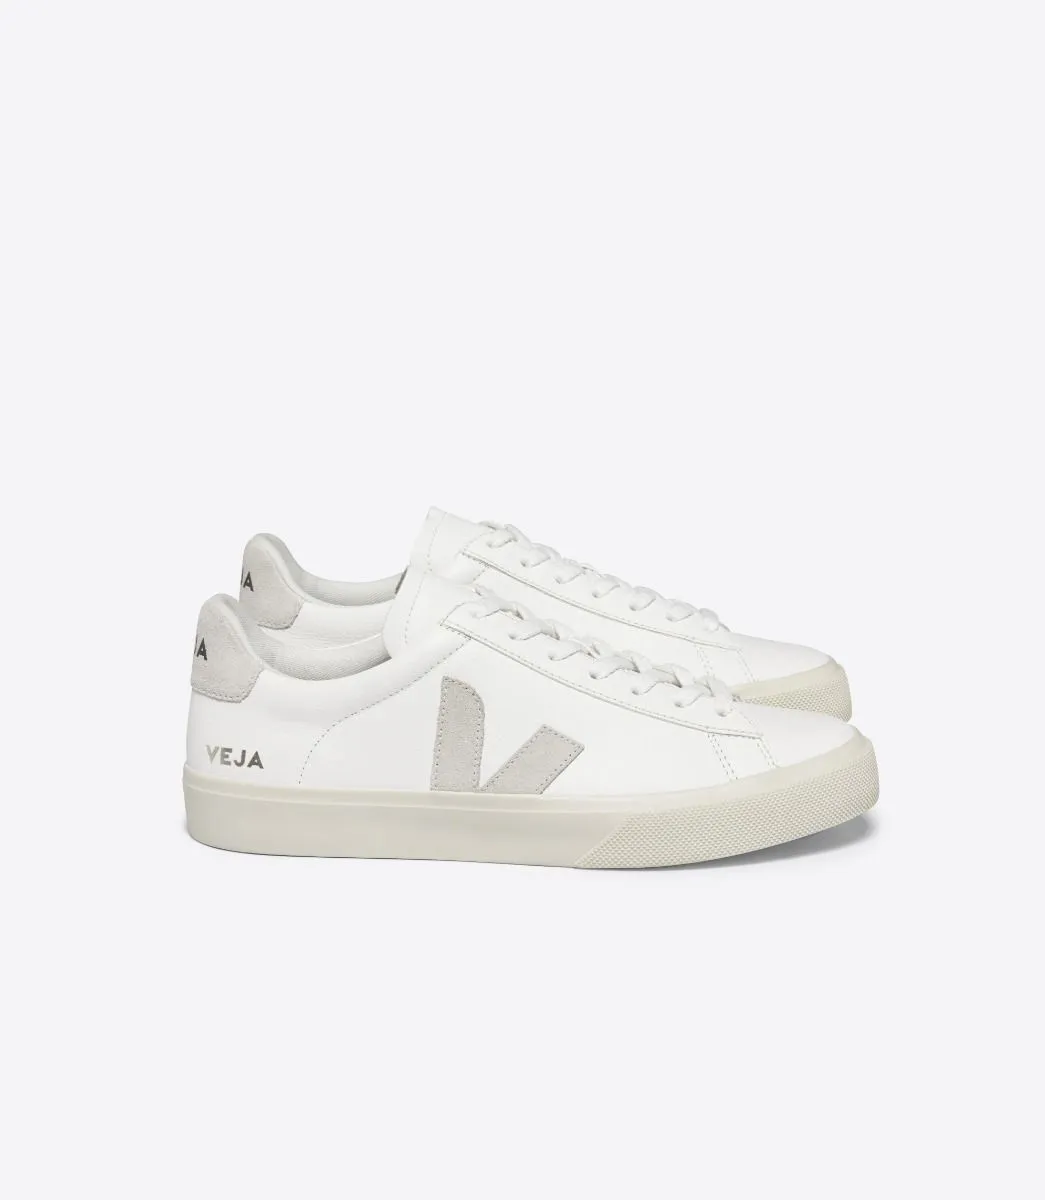 Chaussure Veja Campo Extra White Natural Suede Femmes